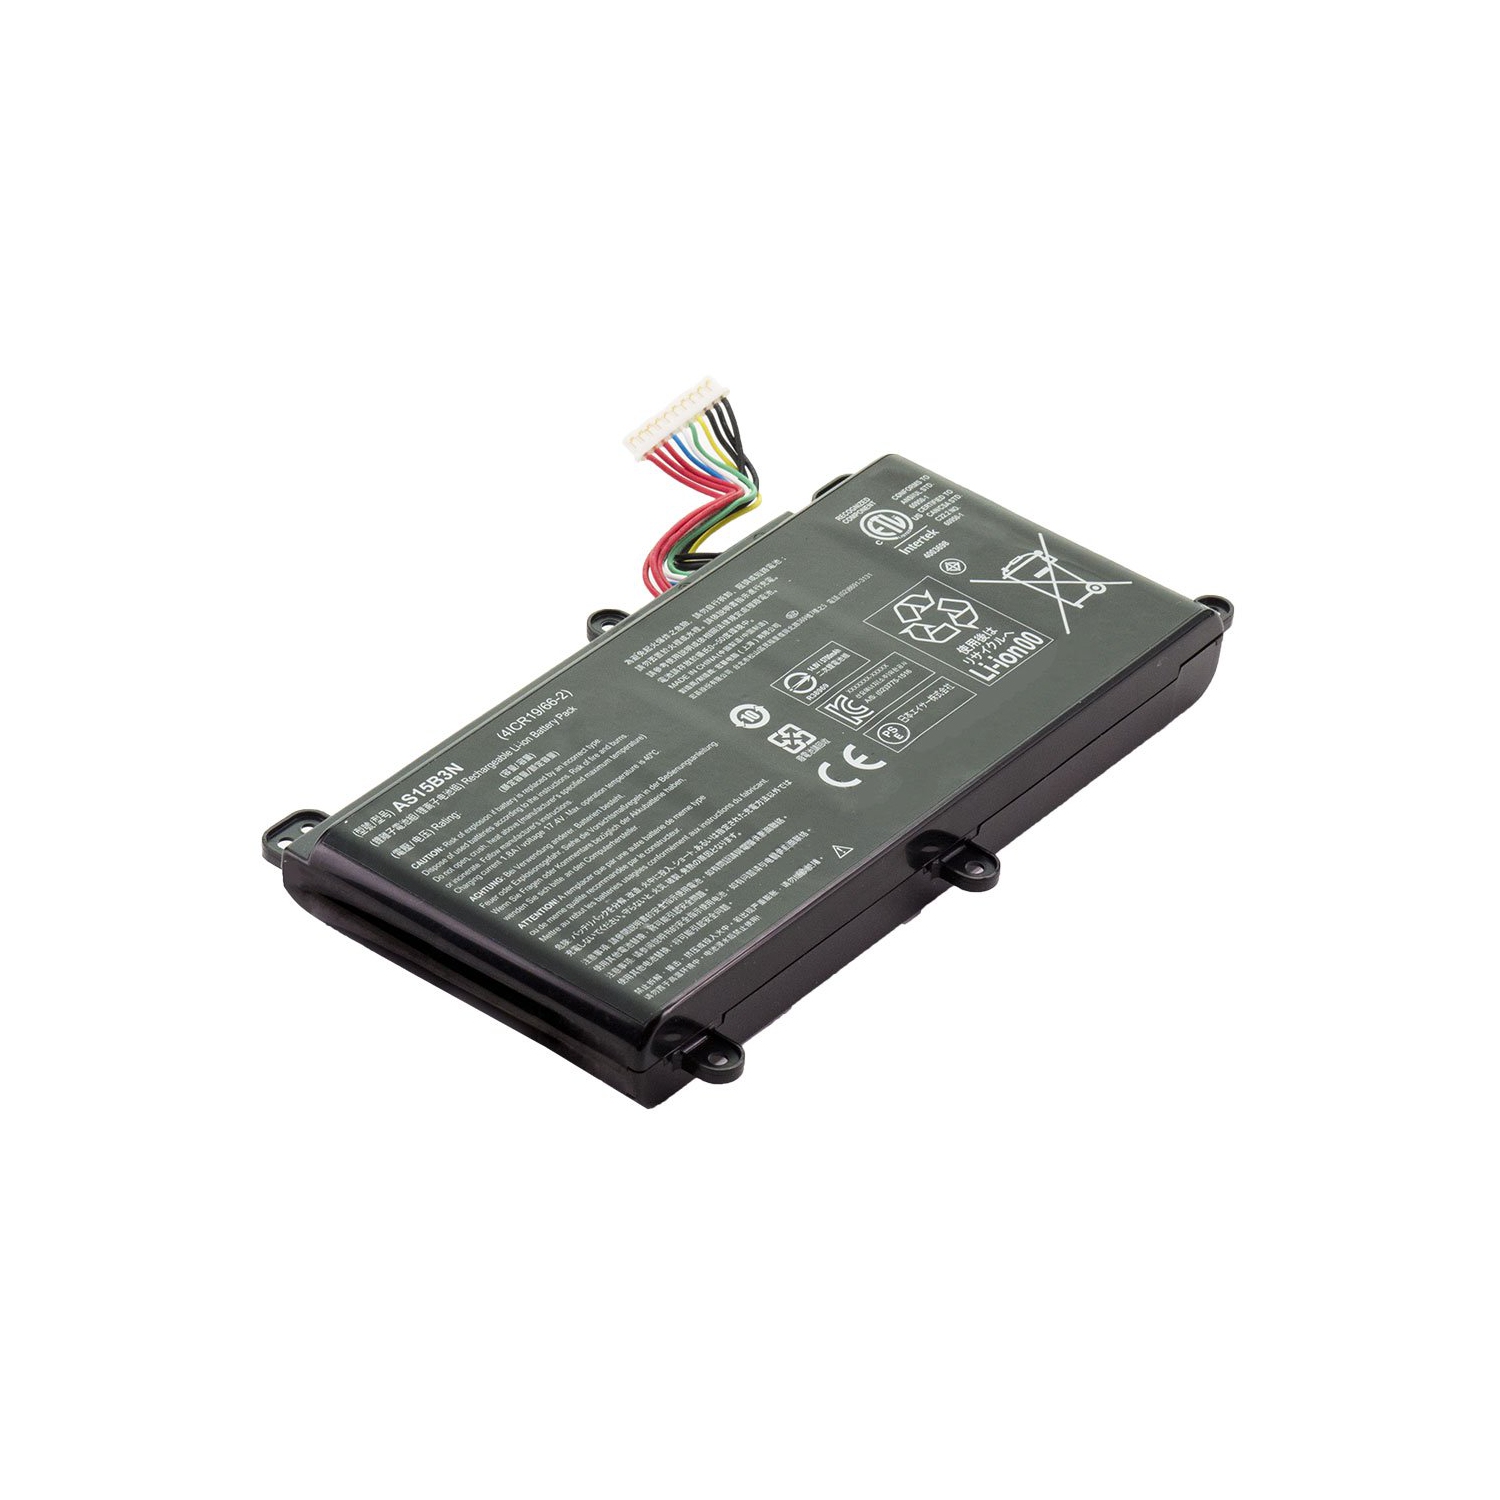 Laptop Battery Replacement for Acer Predator 17 G9-793-767T, AS15B3N, KT.00803.004, KT.00803.005